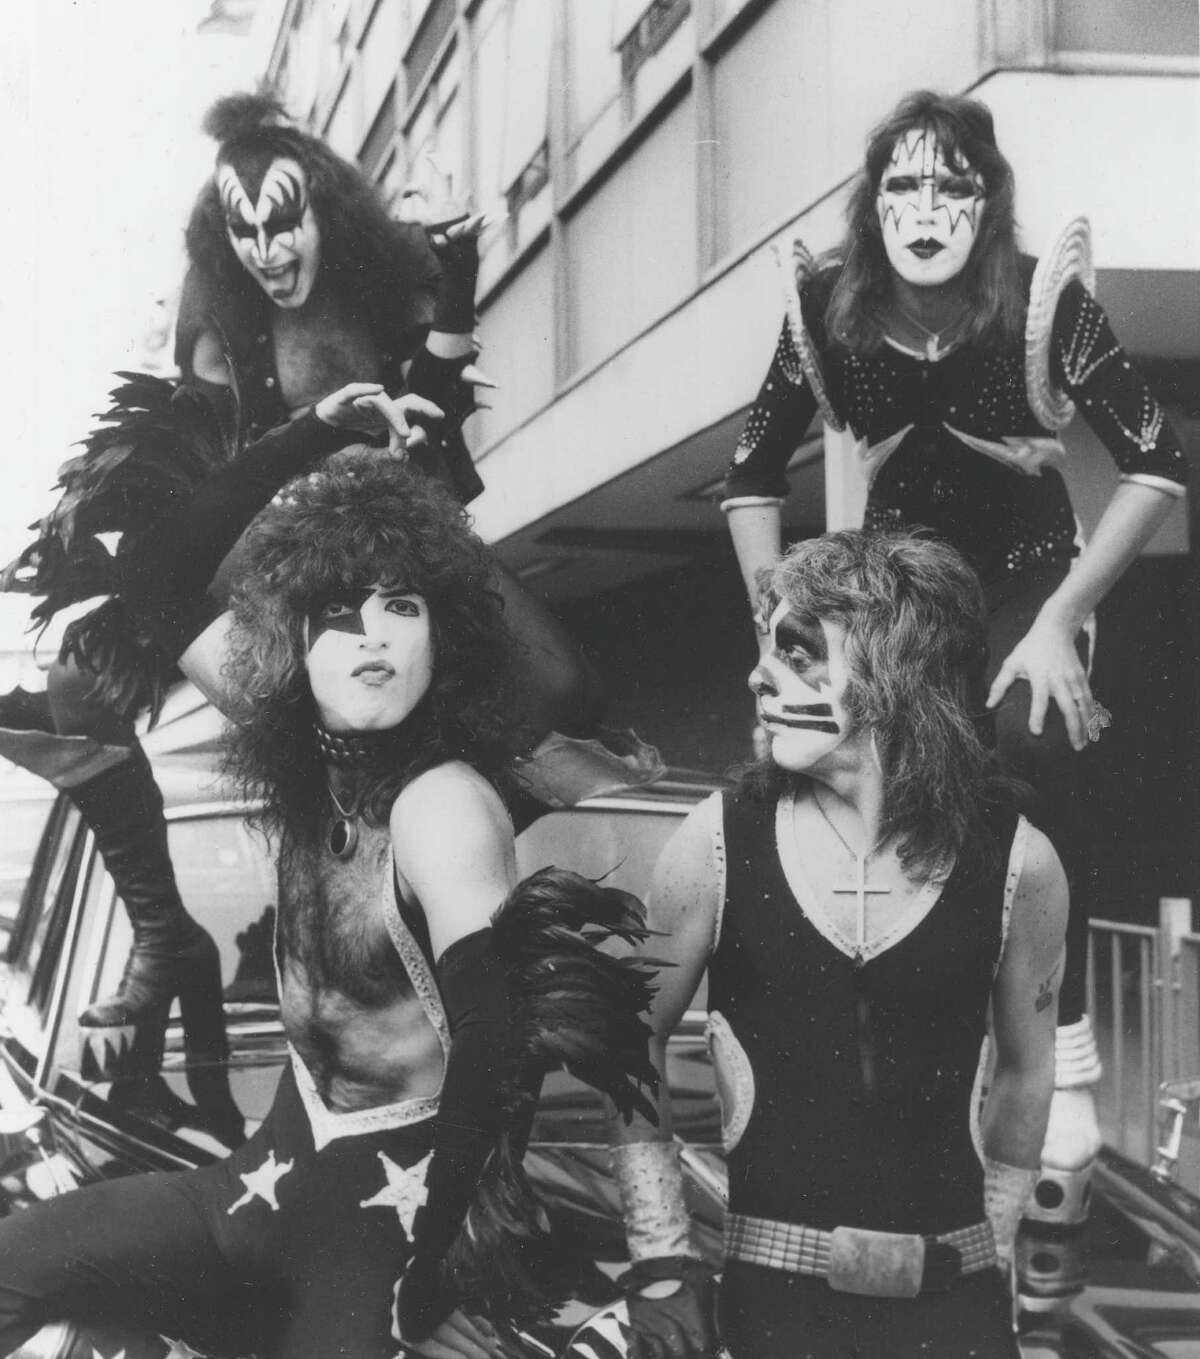 American rock and roll legend KISS arrives at Heathrow Airport in London, on May 12, 1976, for their concert tour through Great Britain. In the back are bassist Gene Simmons, left, and guitarist Ace Frehley; in front are singer/guitarist Paul Stanley and drummer Peter Criss.